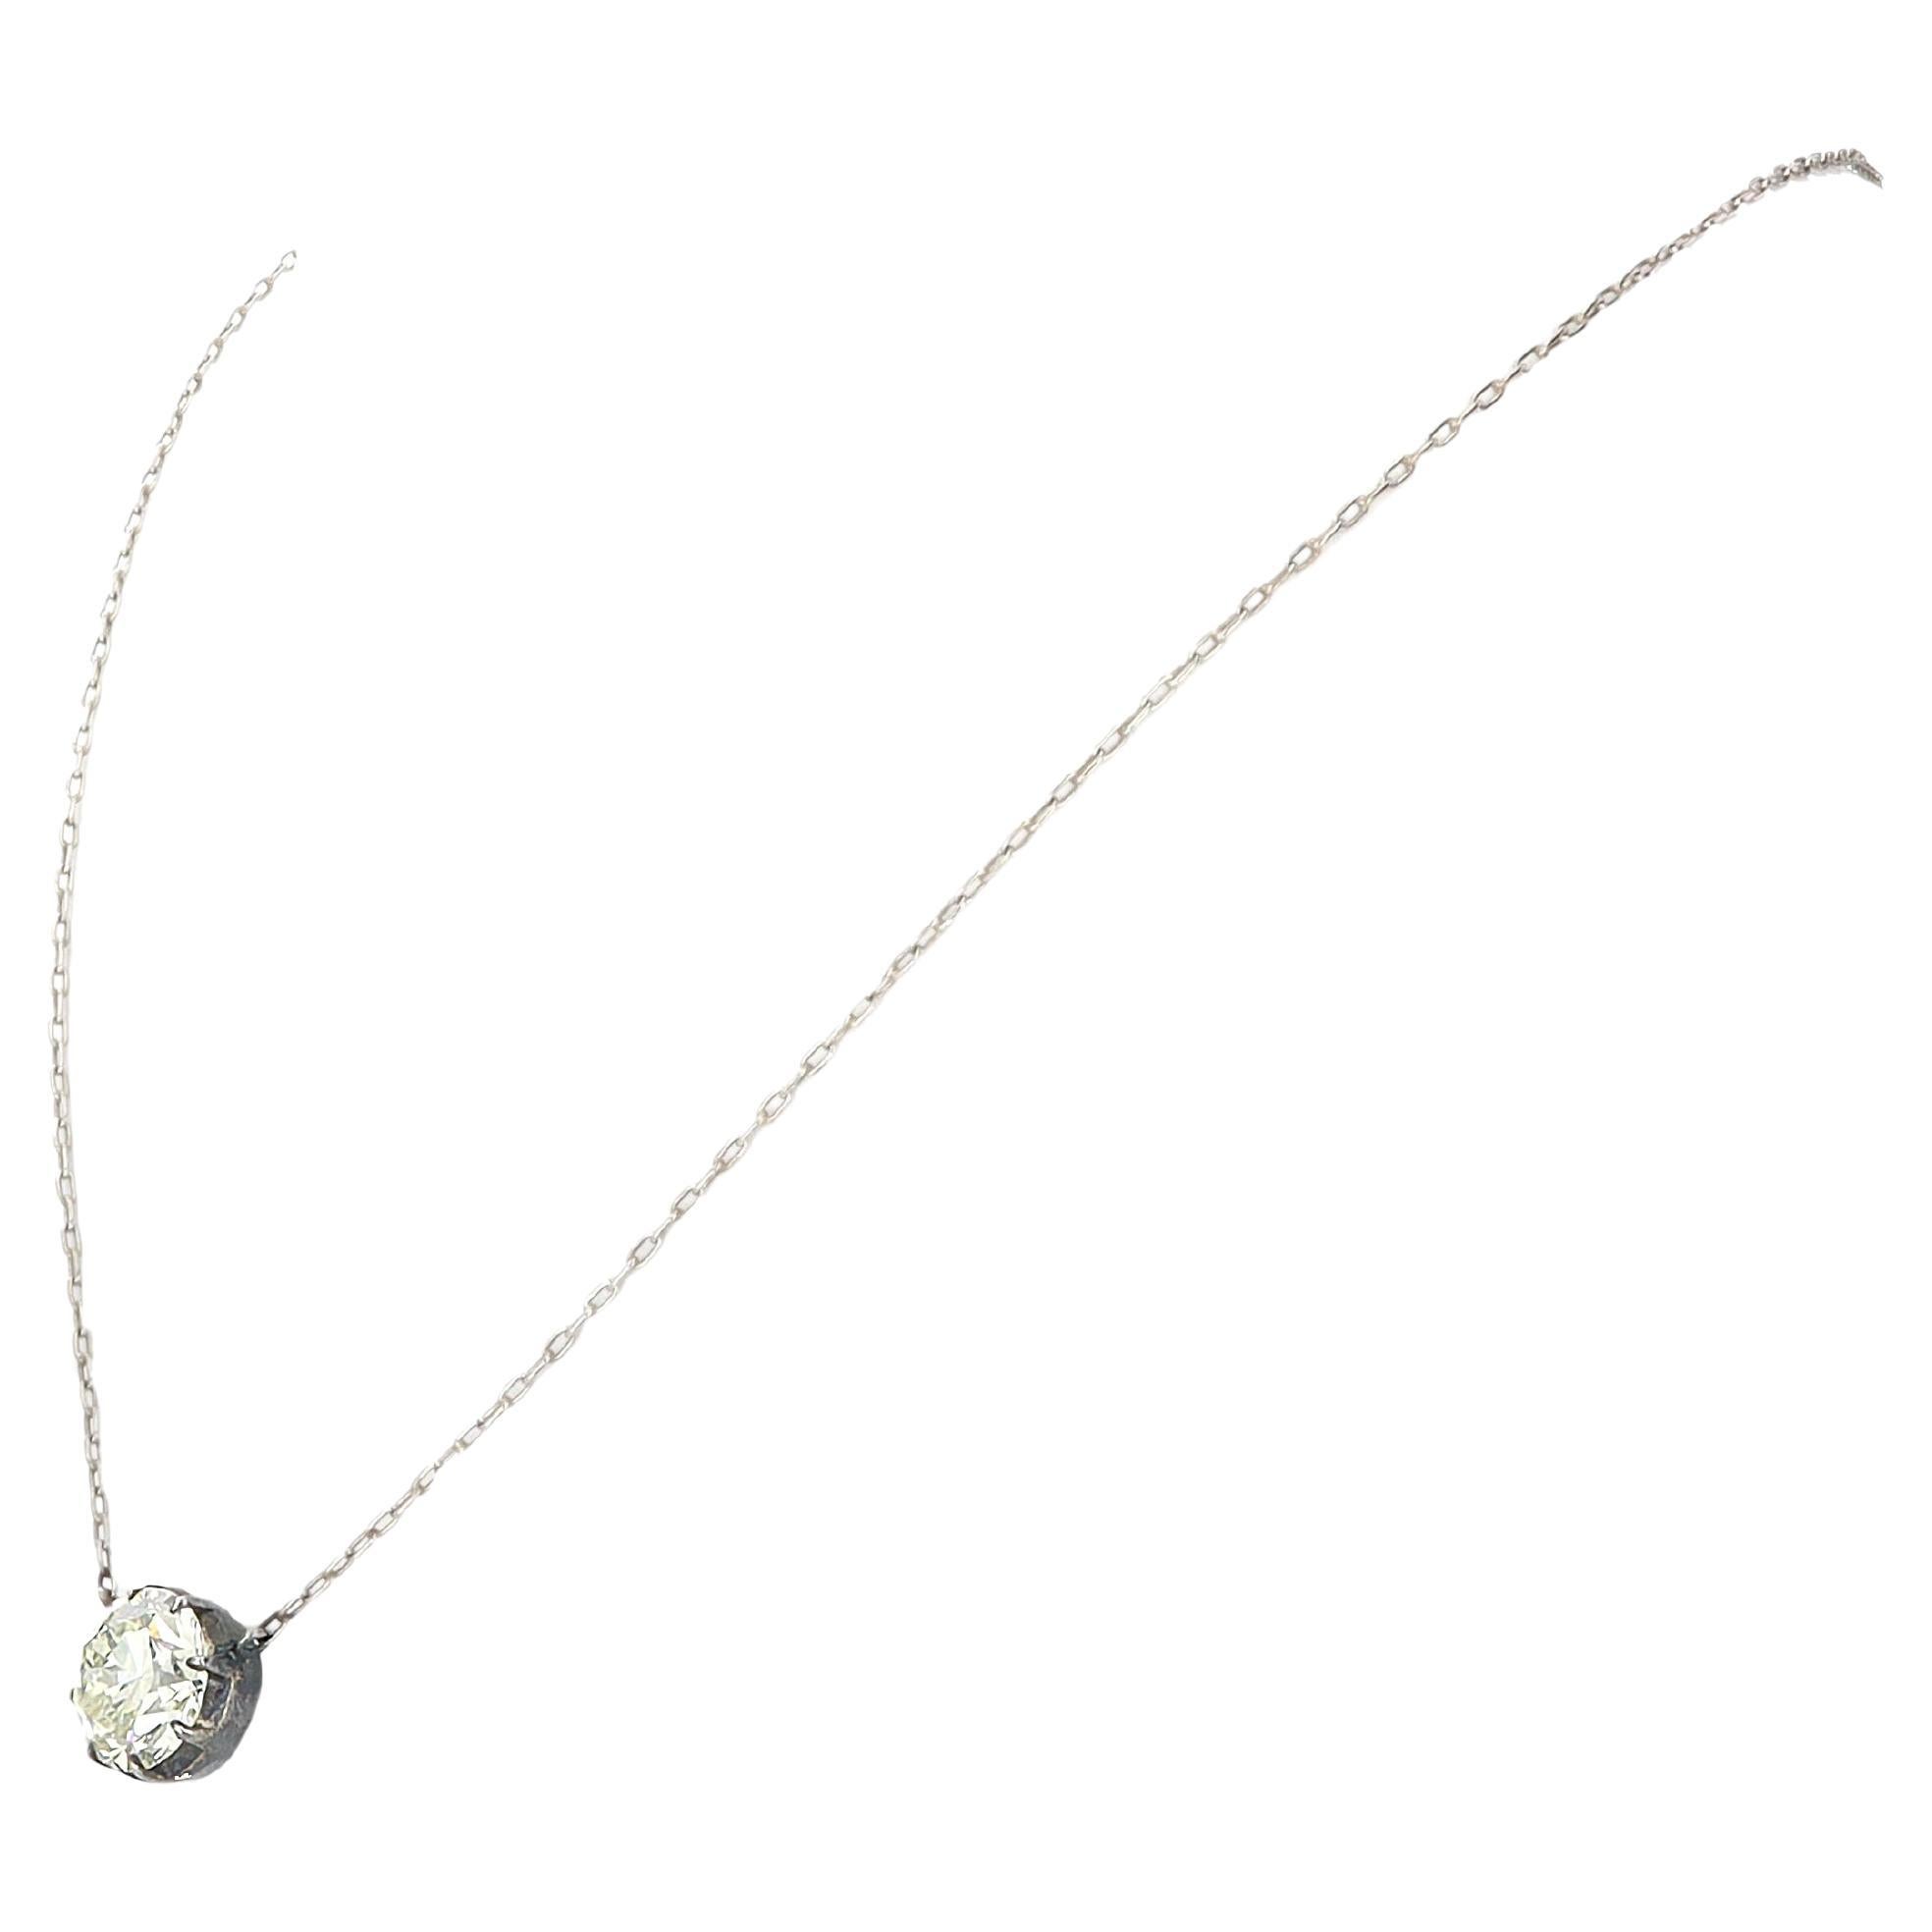 Ladies Georgian old European diamond pendant weighing 3.40 tcw set in sterling silver setting accompanied by an 18 inch platinum chain.